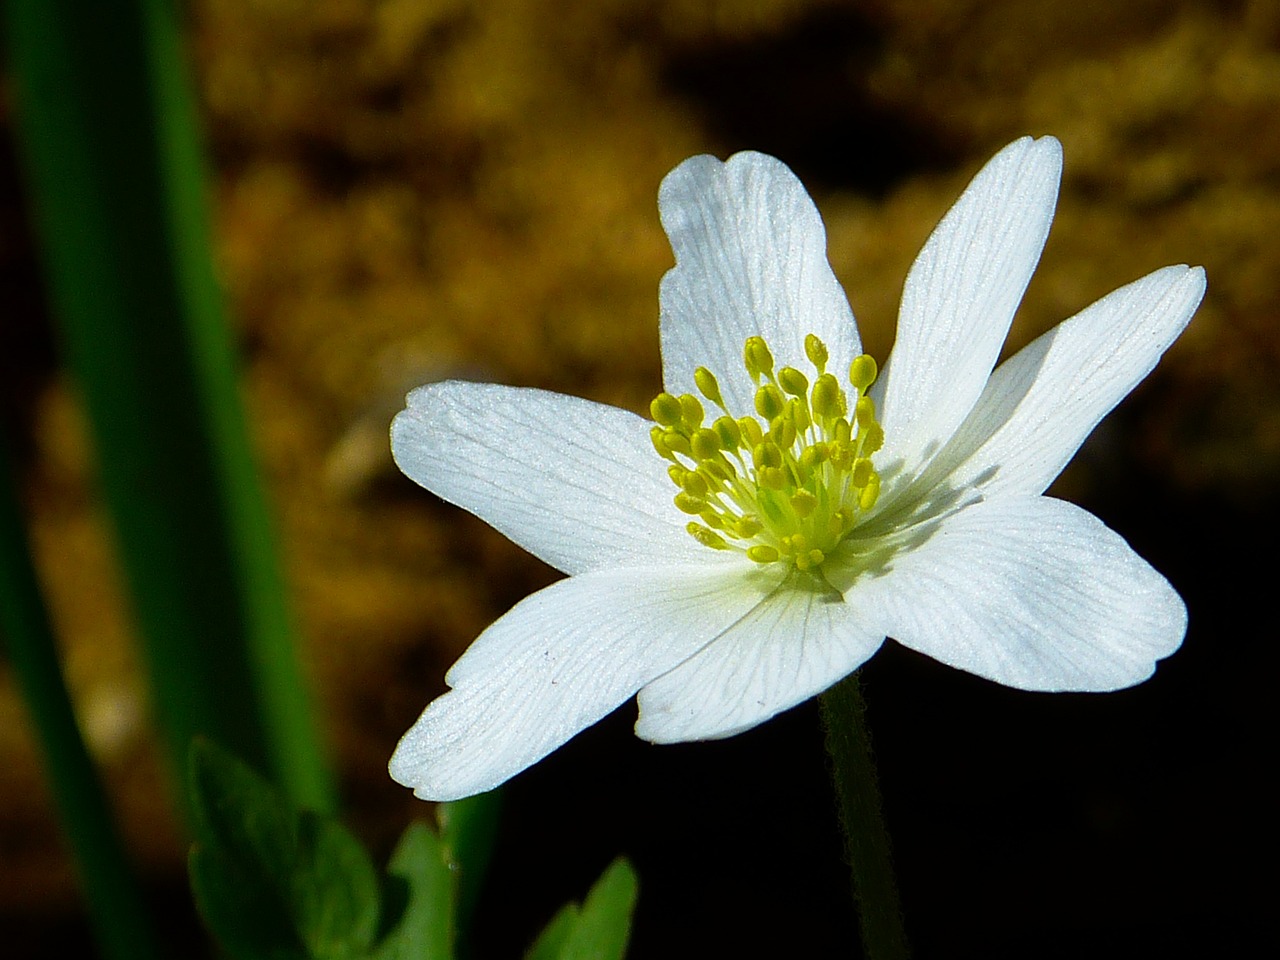 a close up of a white flower with green leaves, by Tom Carapic, flickr, anemones, drosera capensis, beautiful flower, simplicity